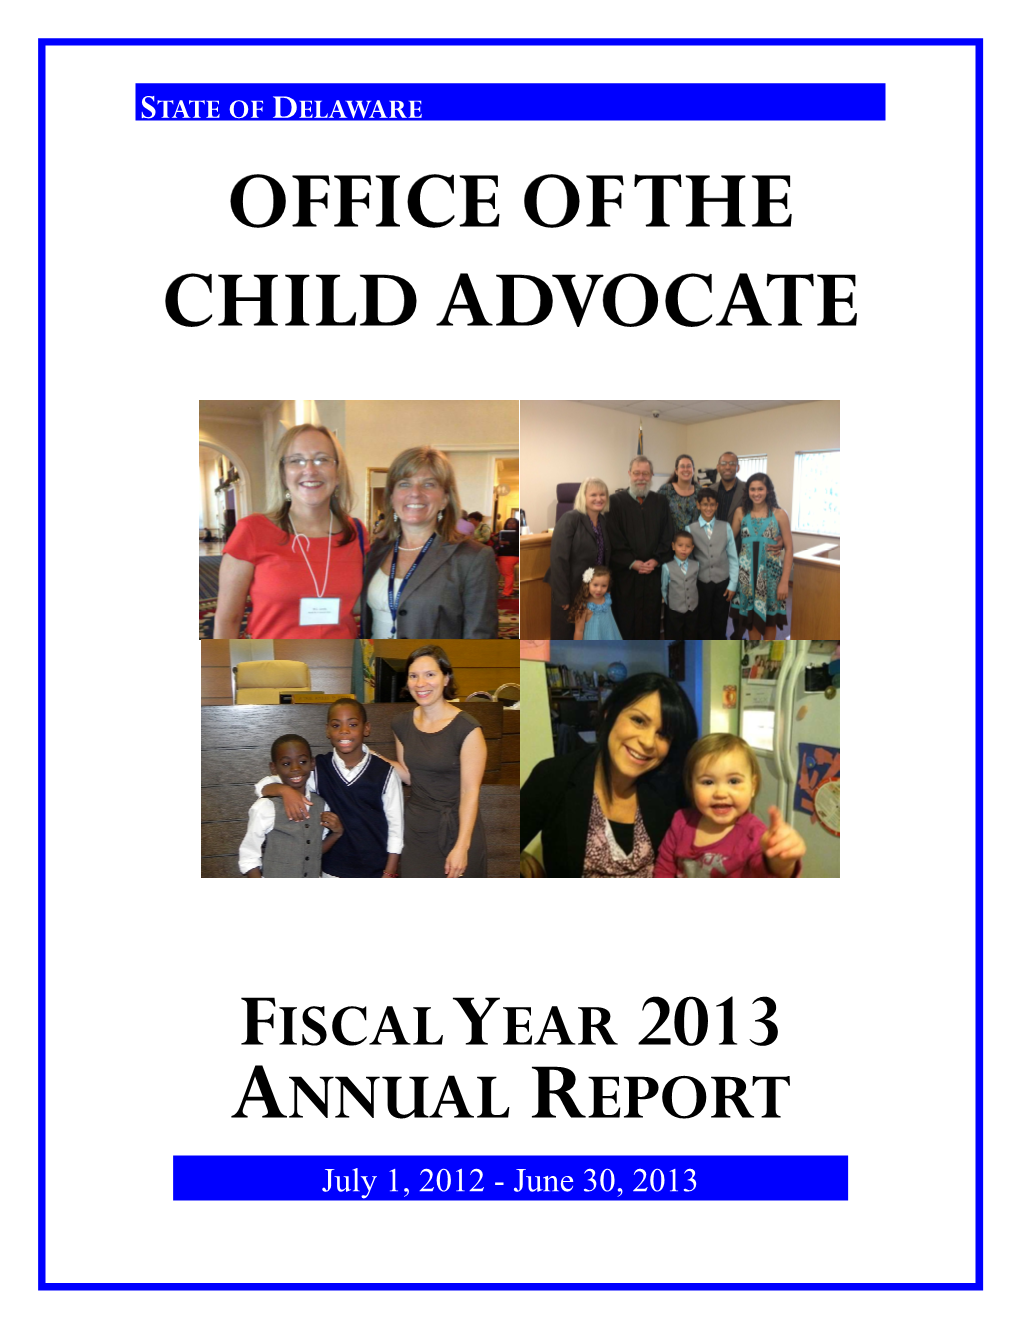 Fiscal Year 2013 Annual Report